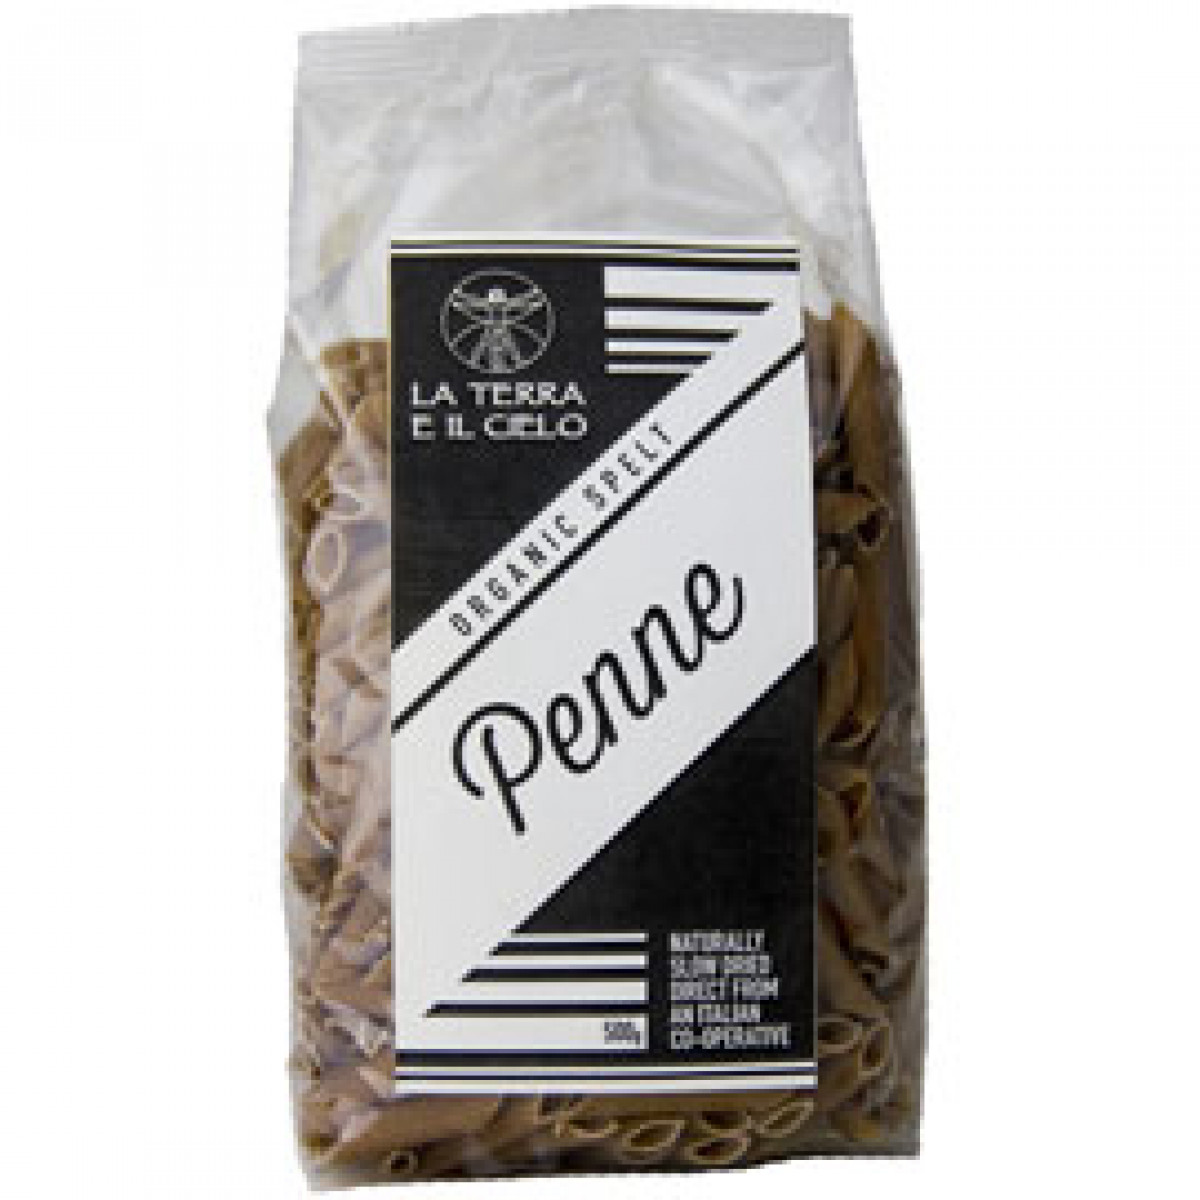 Product picture for Spelt Penne